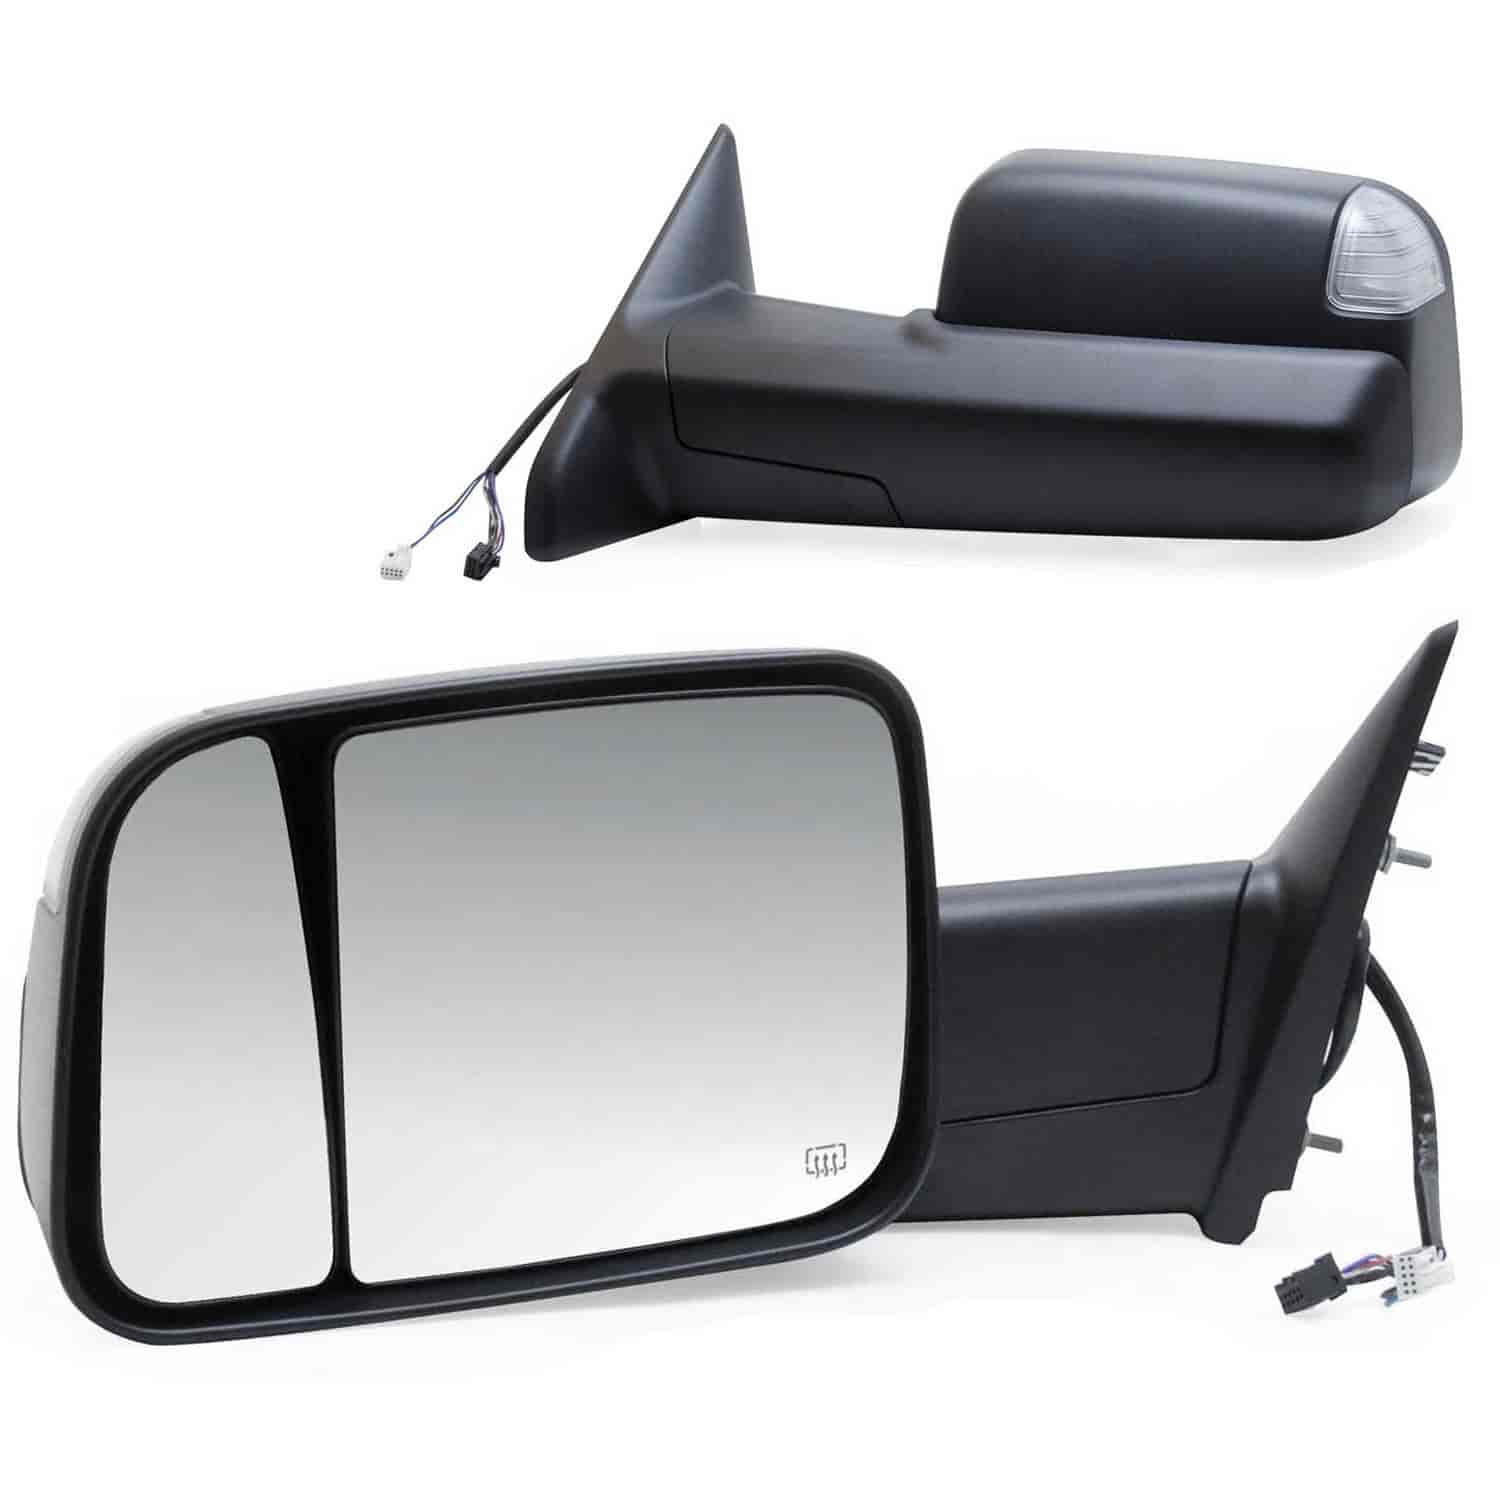 OEM Style Replacement mirror set for 09-13 Dodge/ Ram Pick-Up 1500 10-13 2500/ 3500 11-13 Ram Pick-U